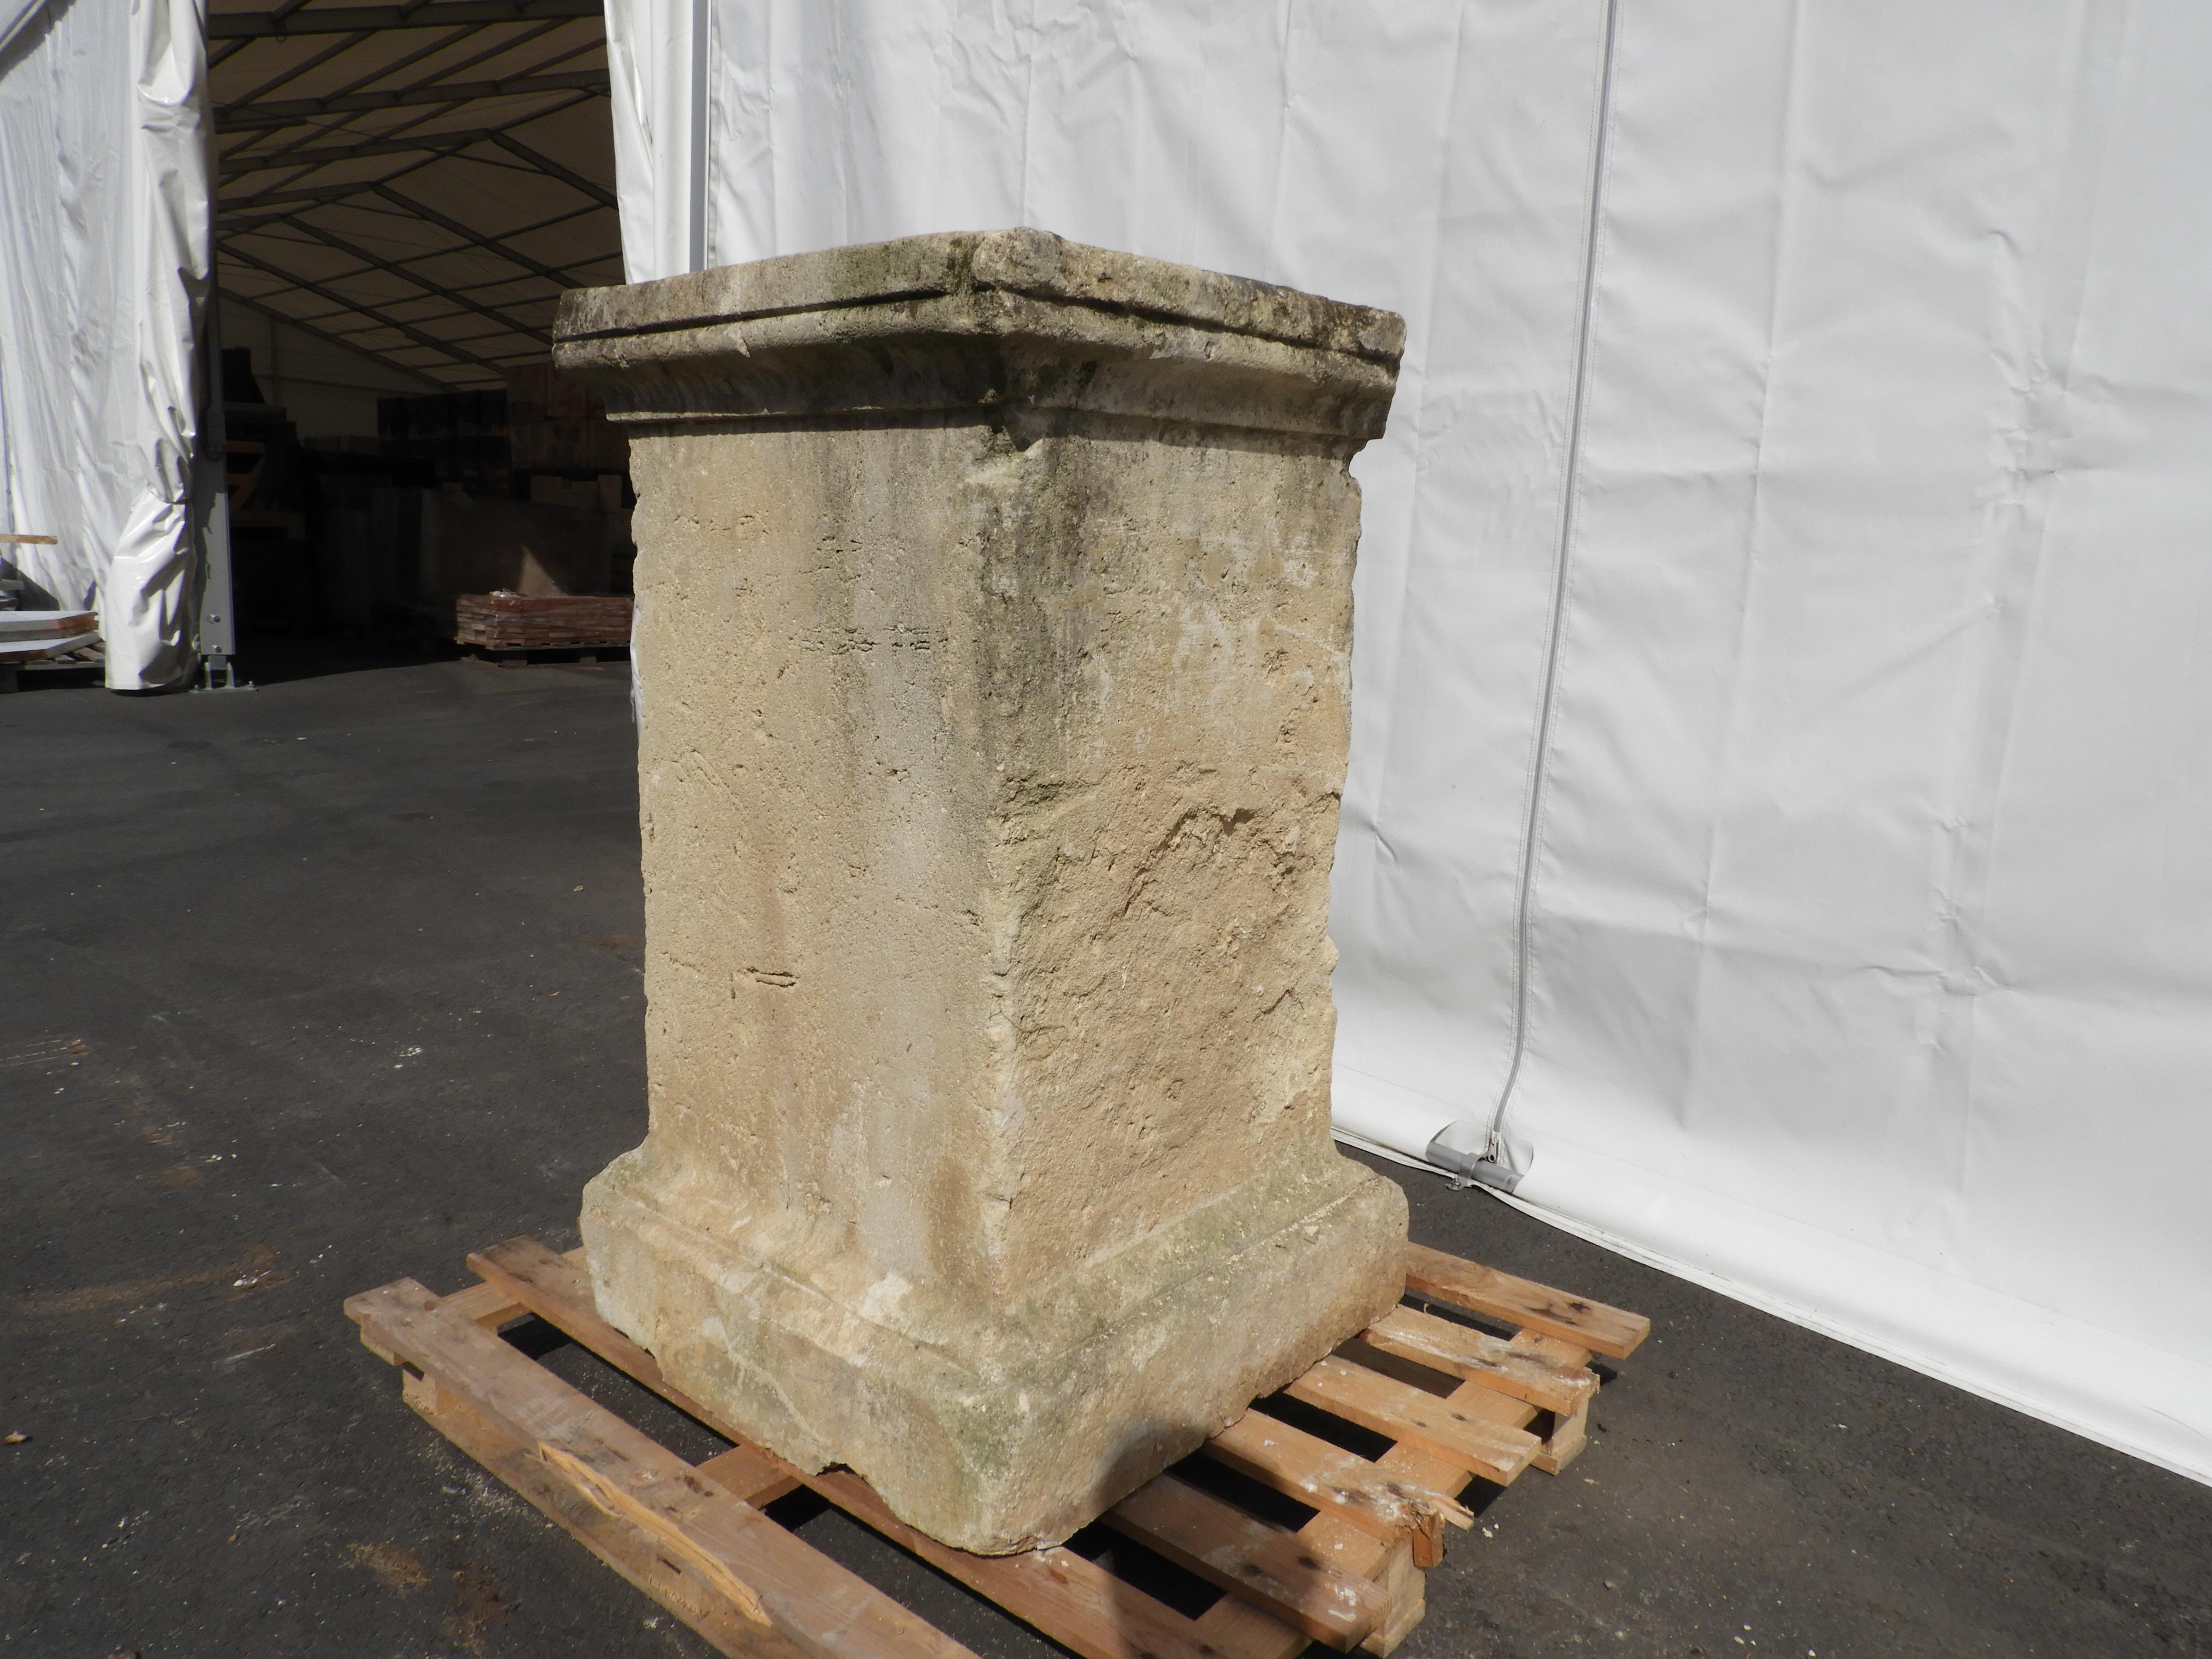 18the century French limestone pedestal with a warn rustic look.